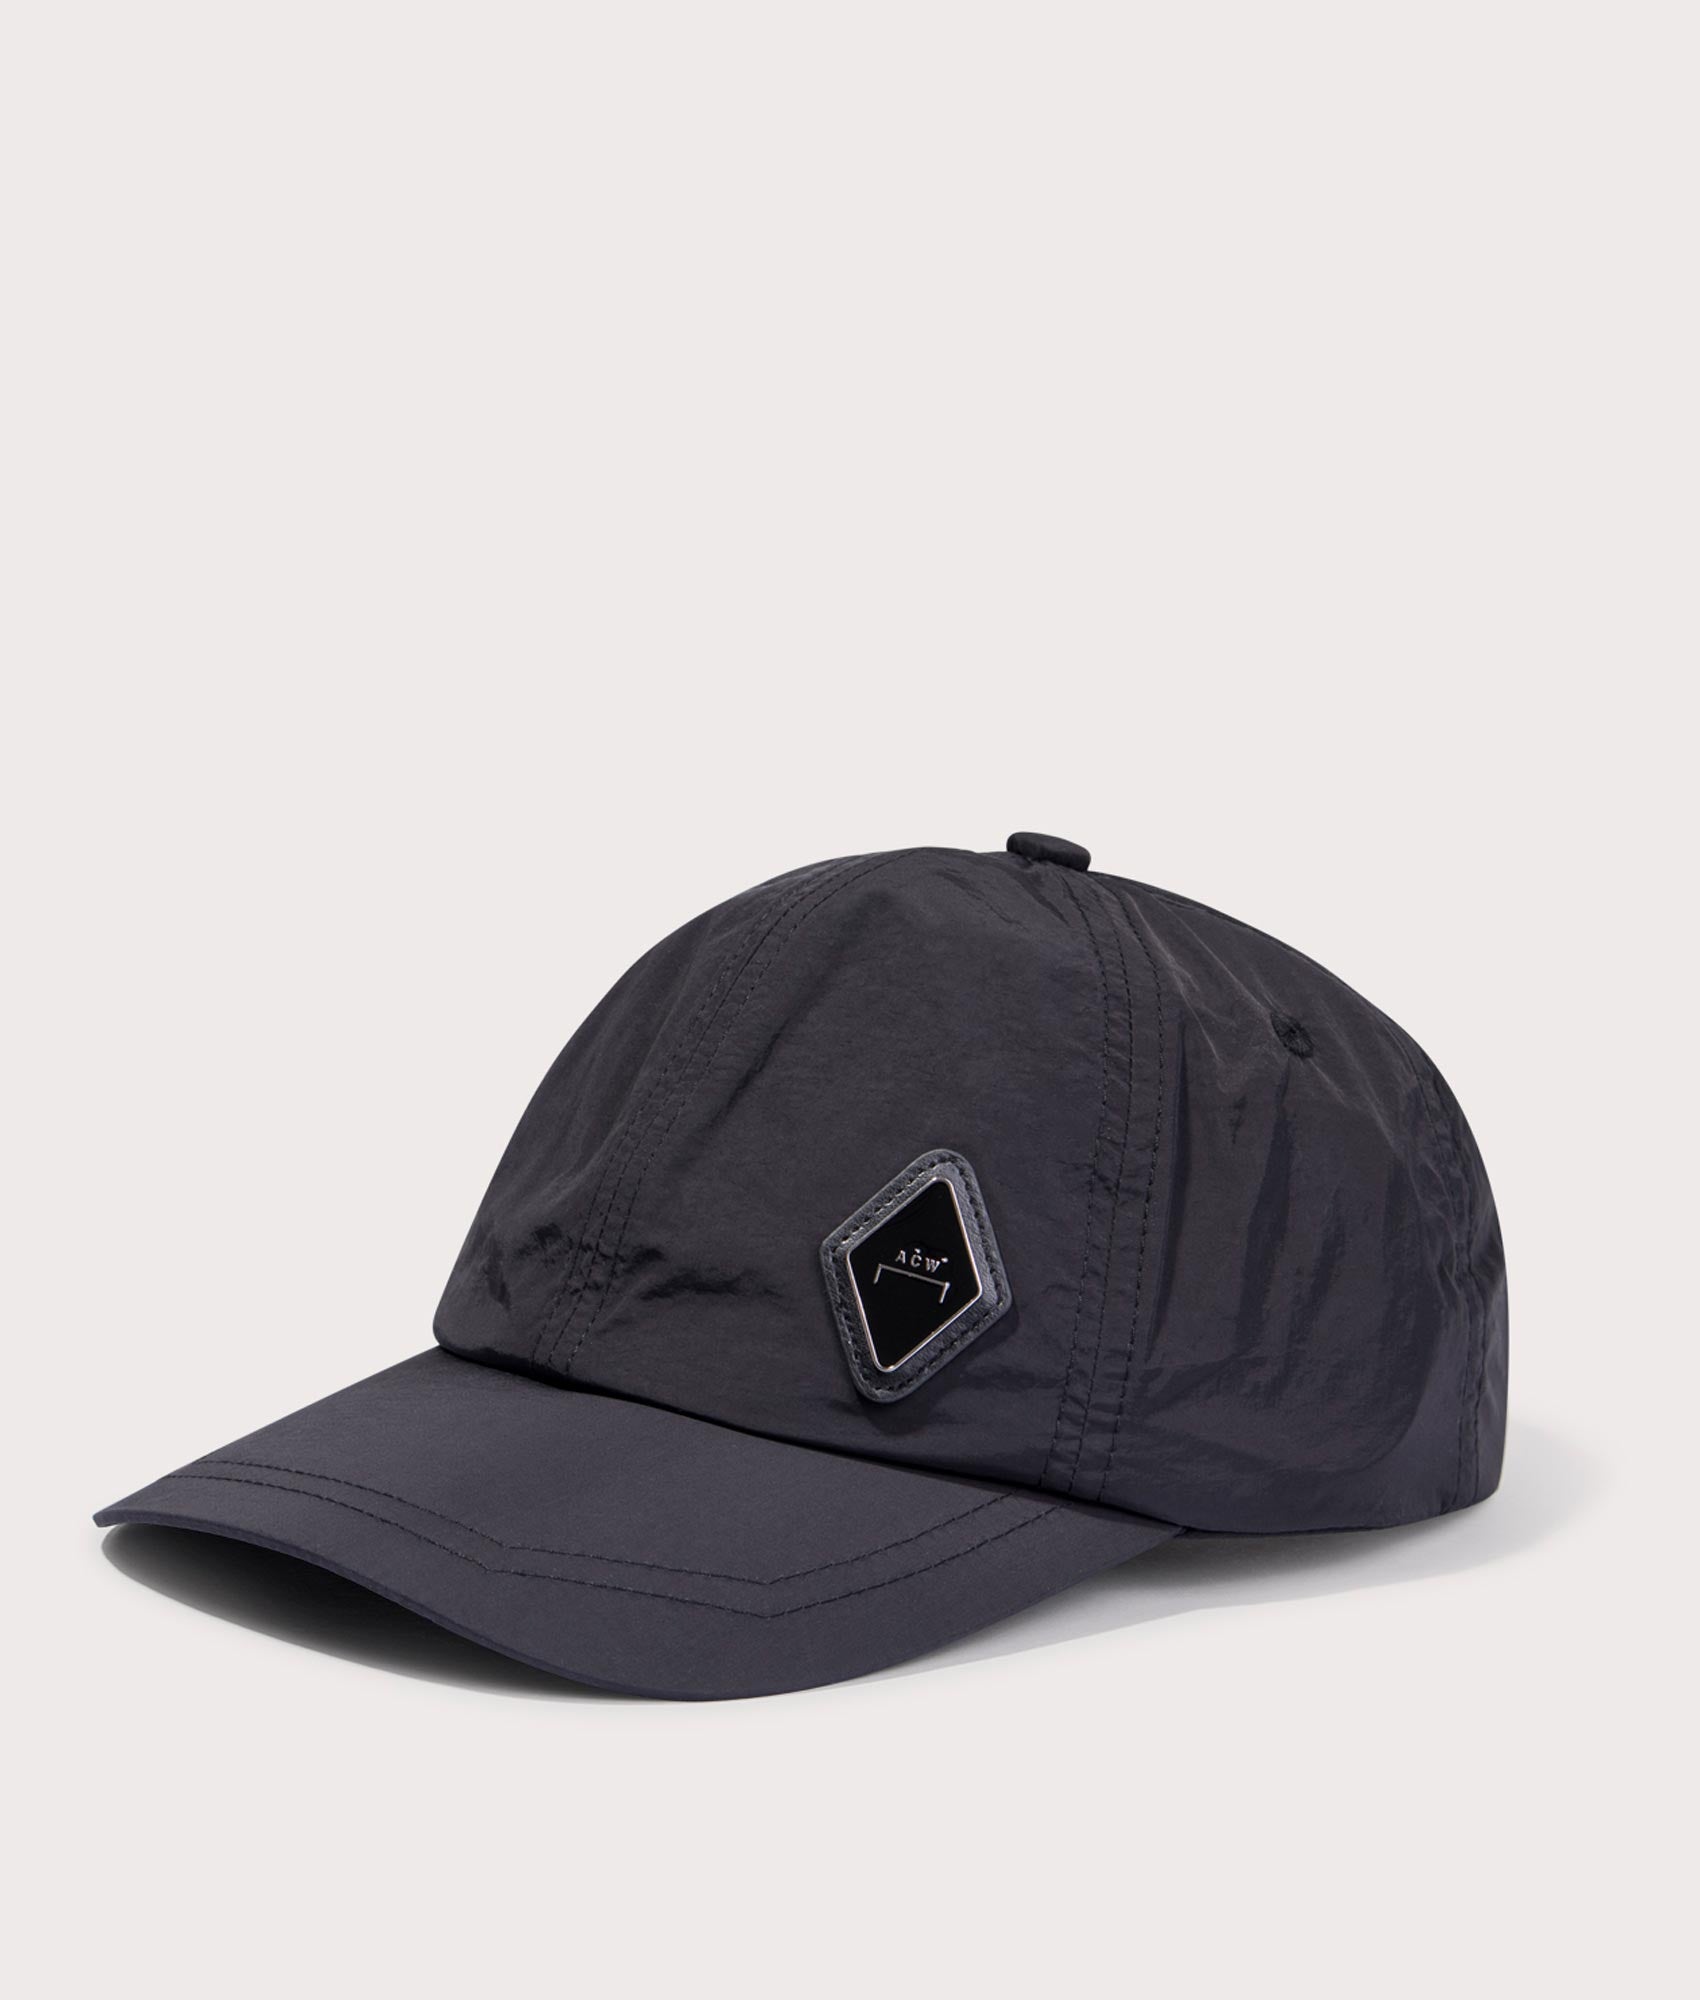 A-COLD-WALL* Mens Diamond Cap - Colour: Onyx - Size: One Size